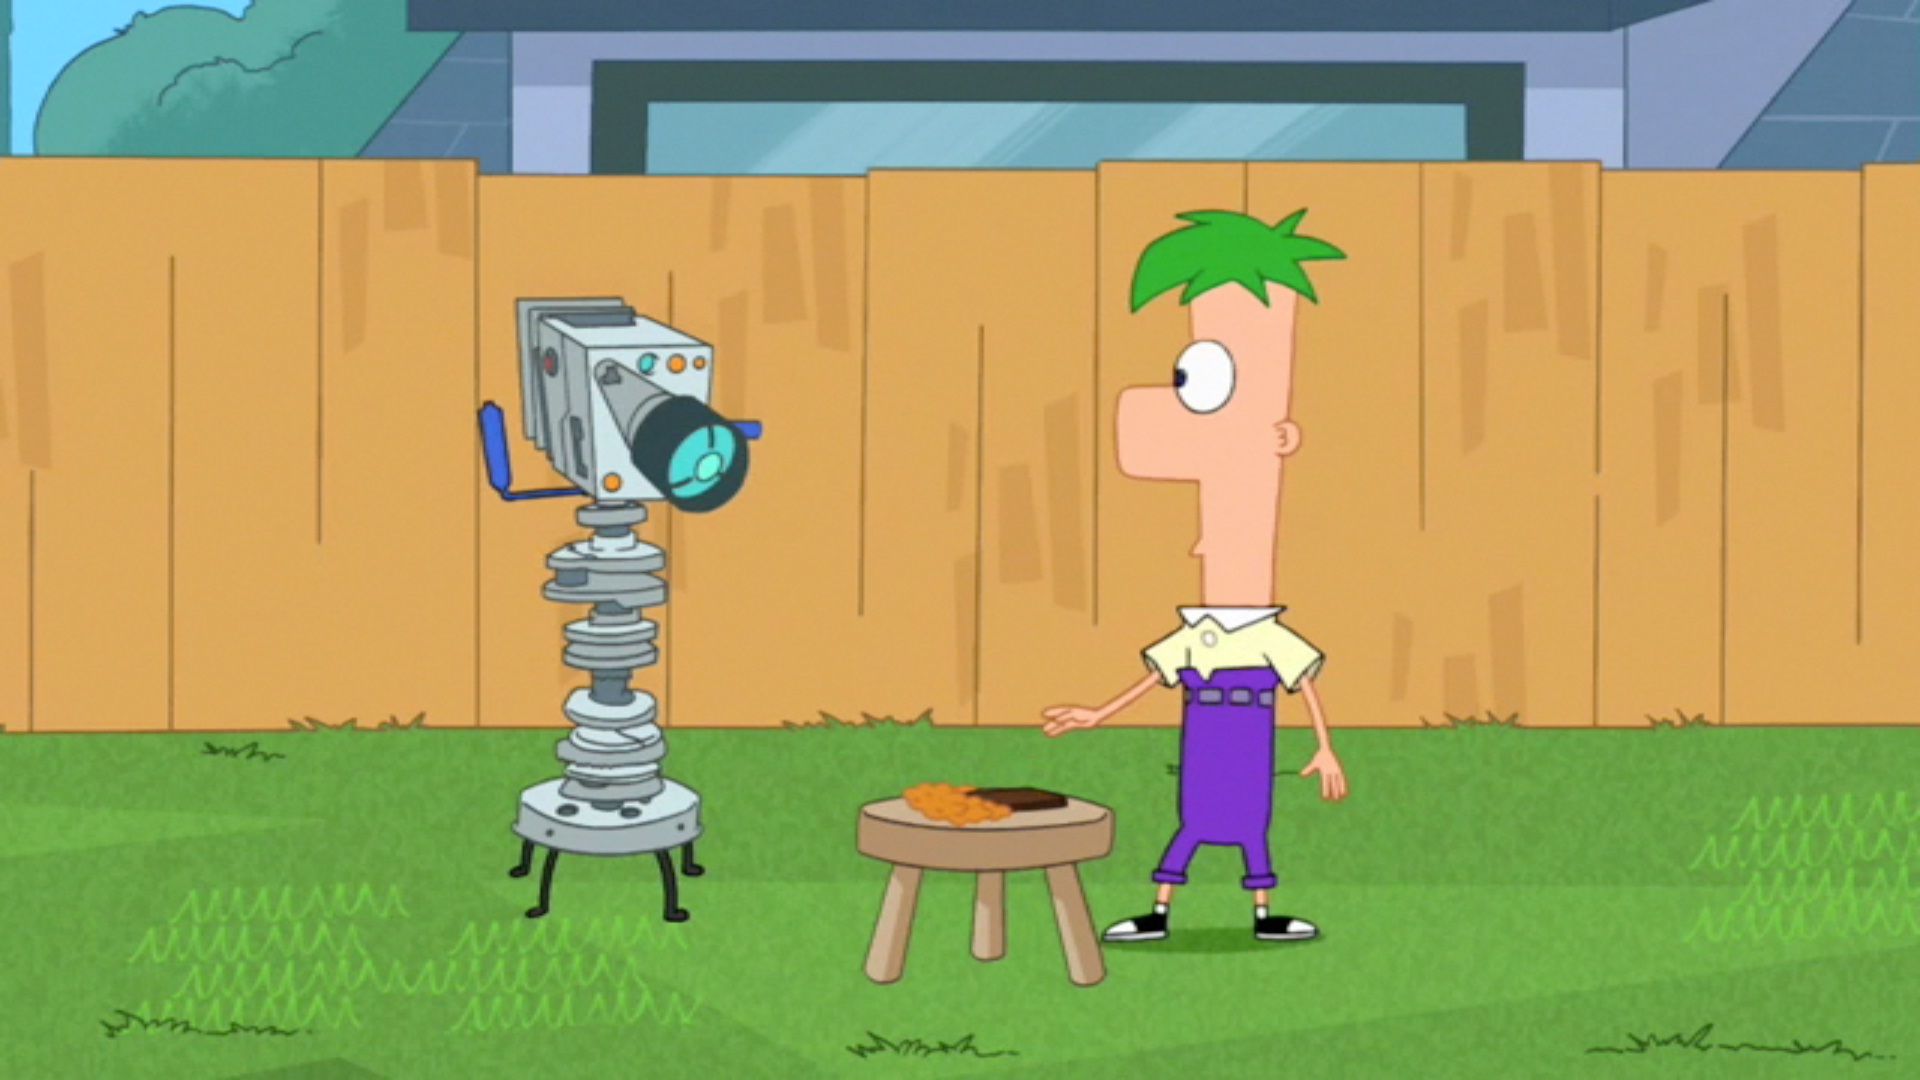 Phineas And Ferb Wikia wallpaper